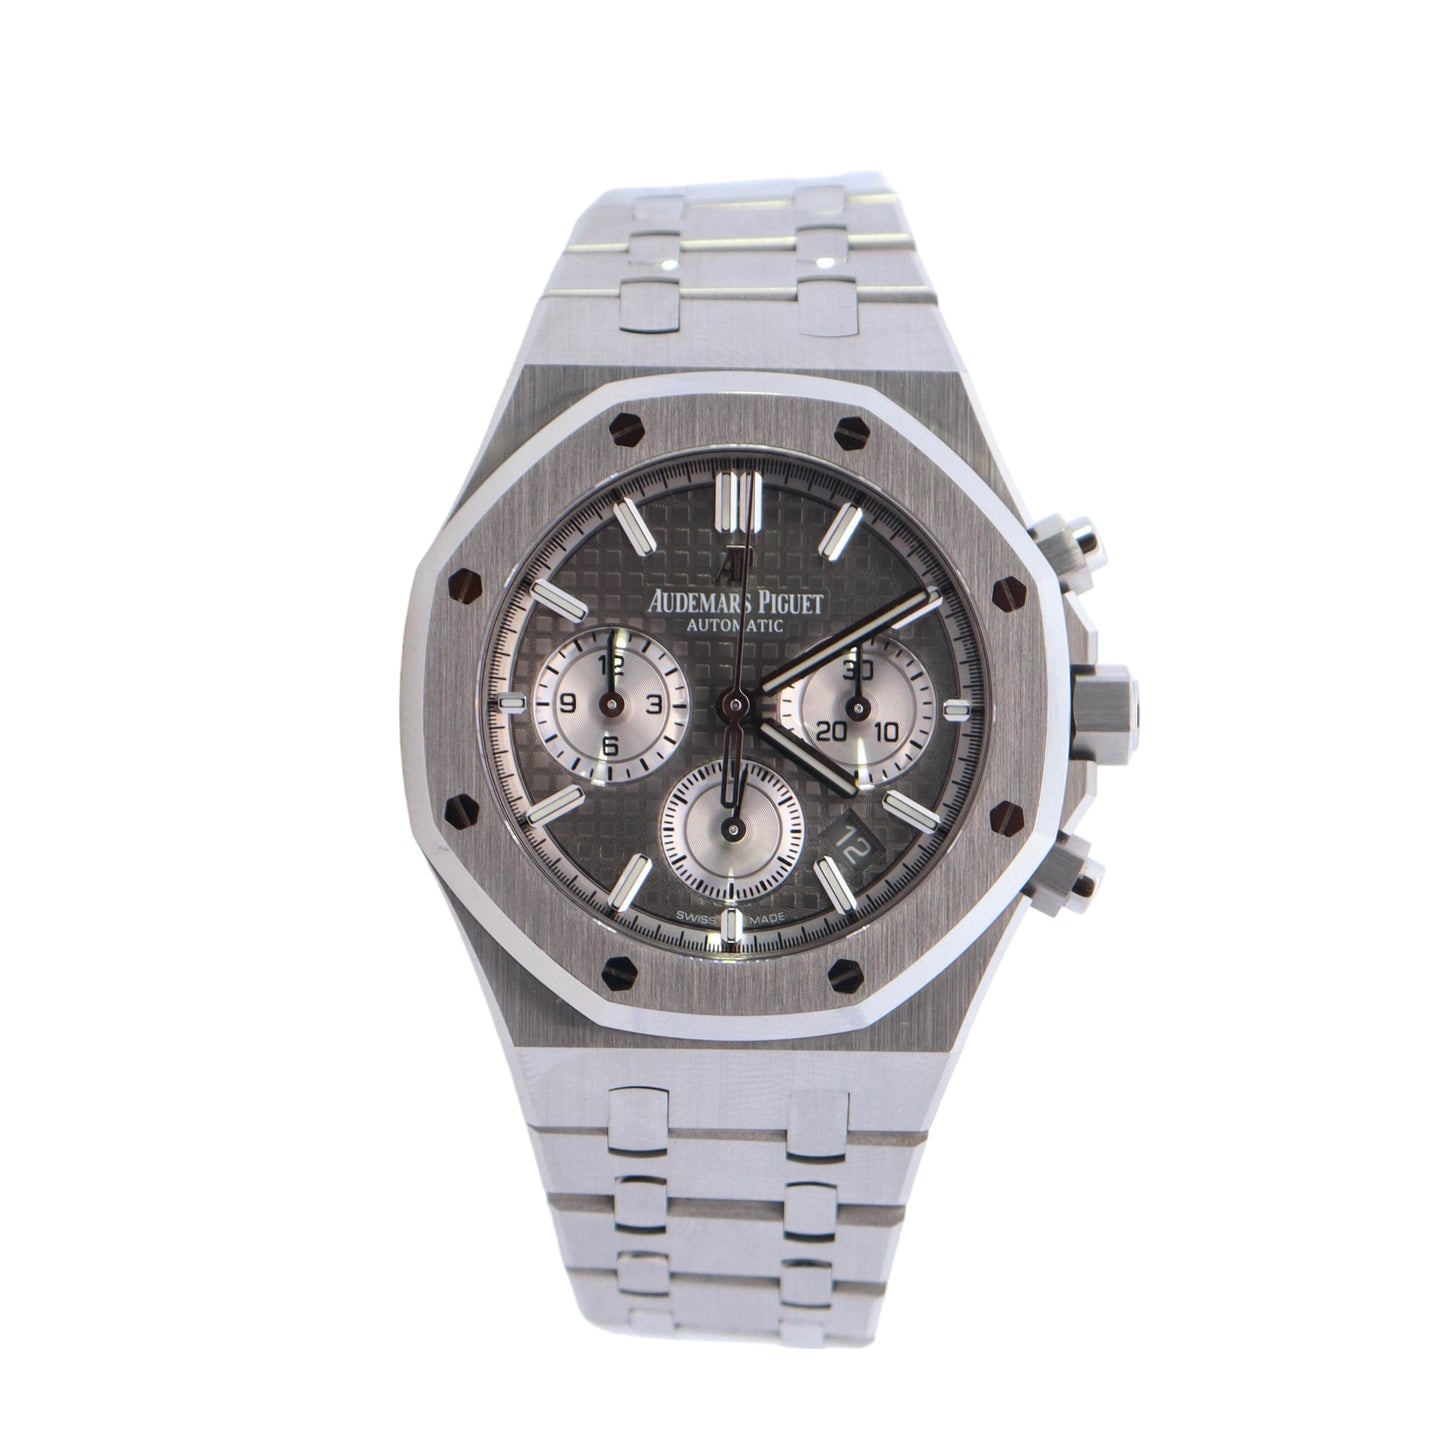 Audemars Piguet Royal Oak Stainless Steel 38mm Grey Chronograph Dial Watch Reference# 26315ST.OO.1256ST.02